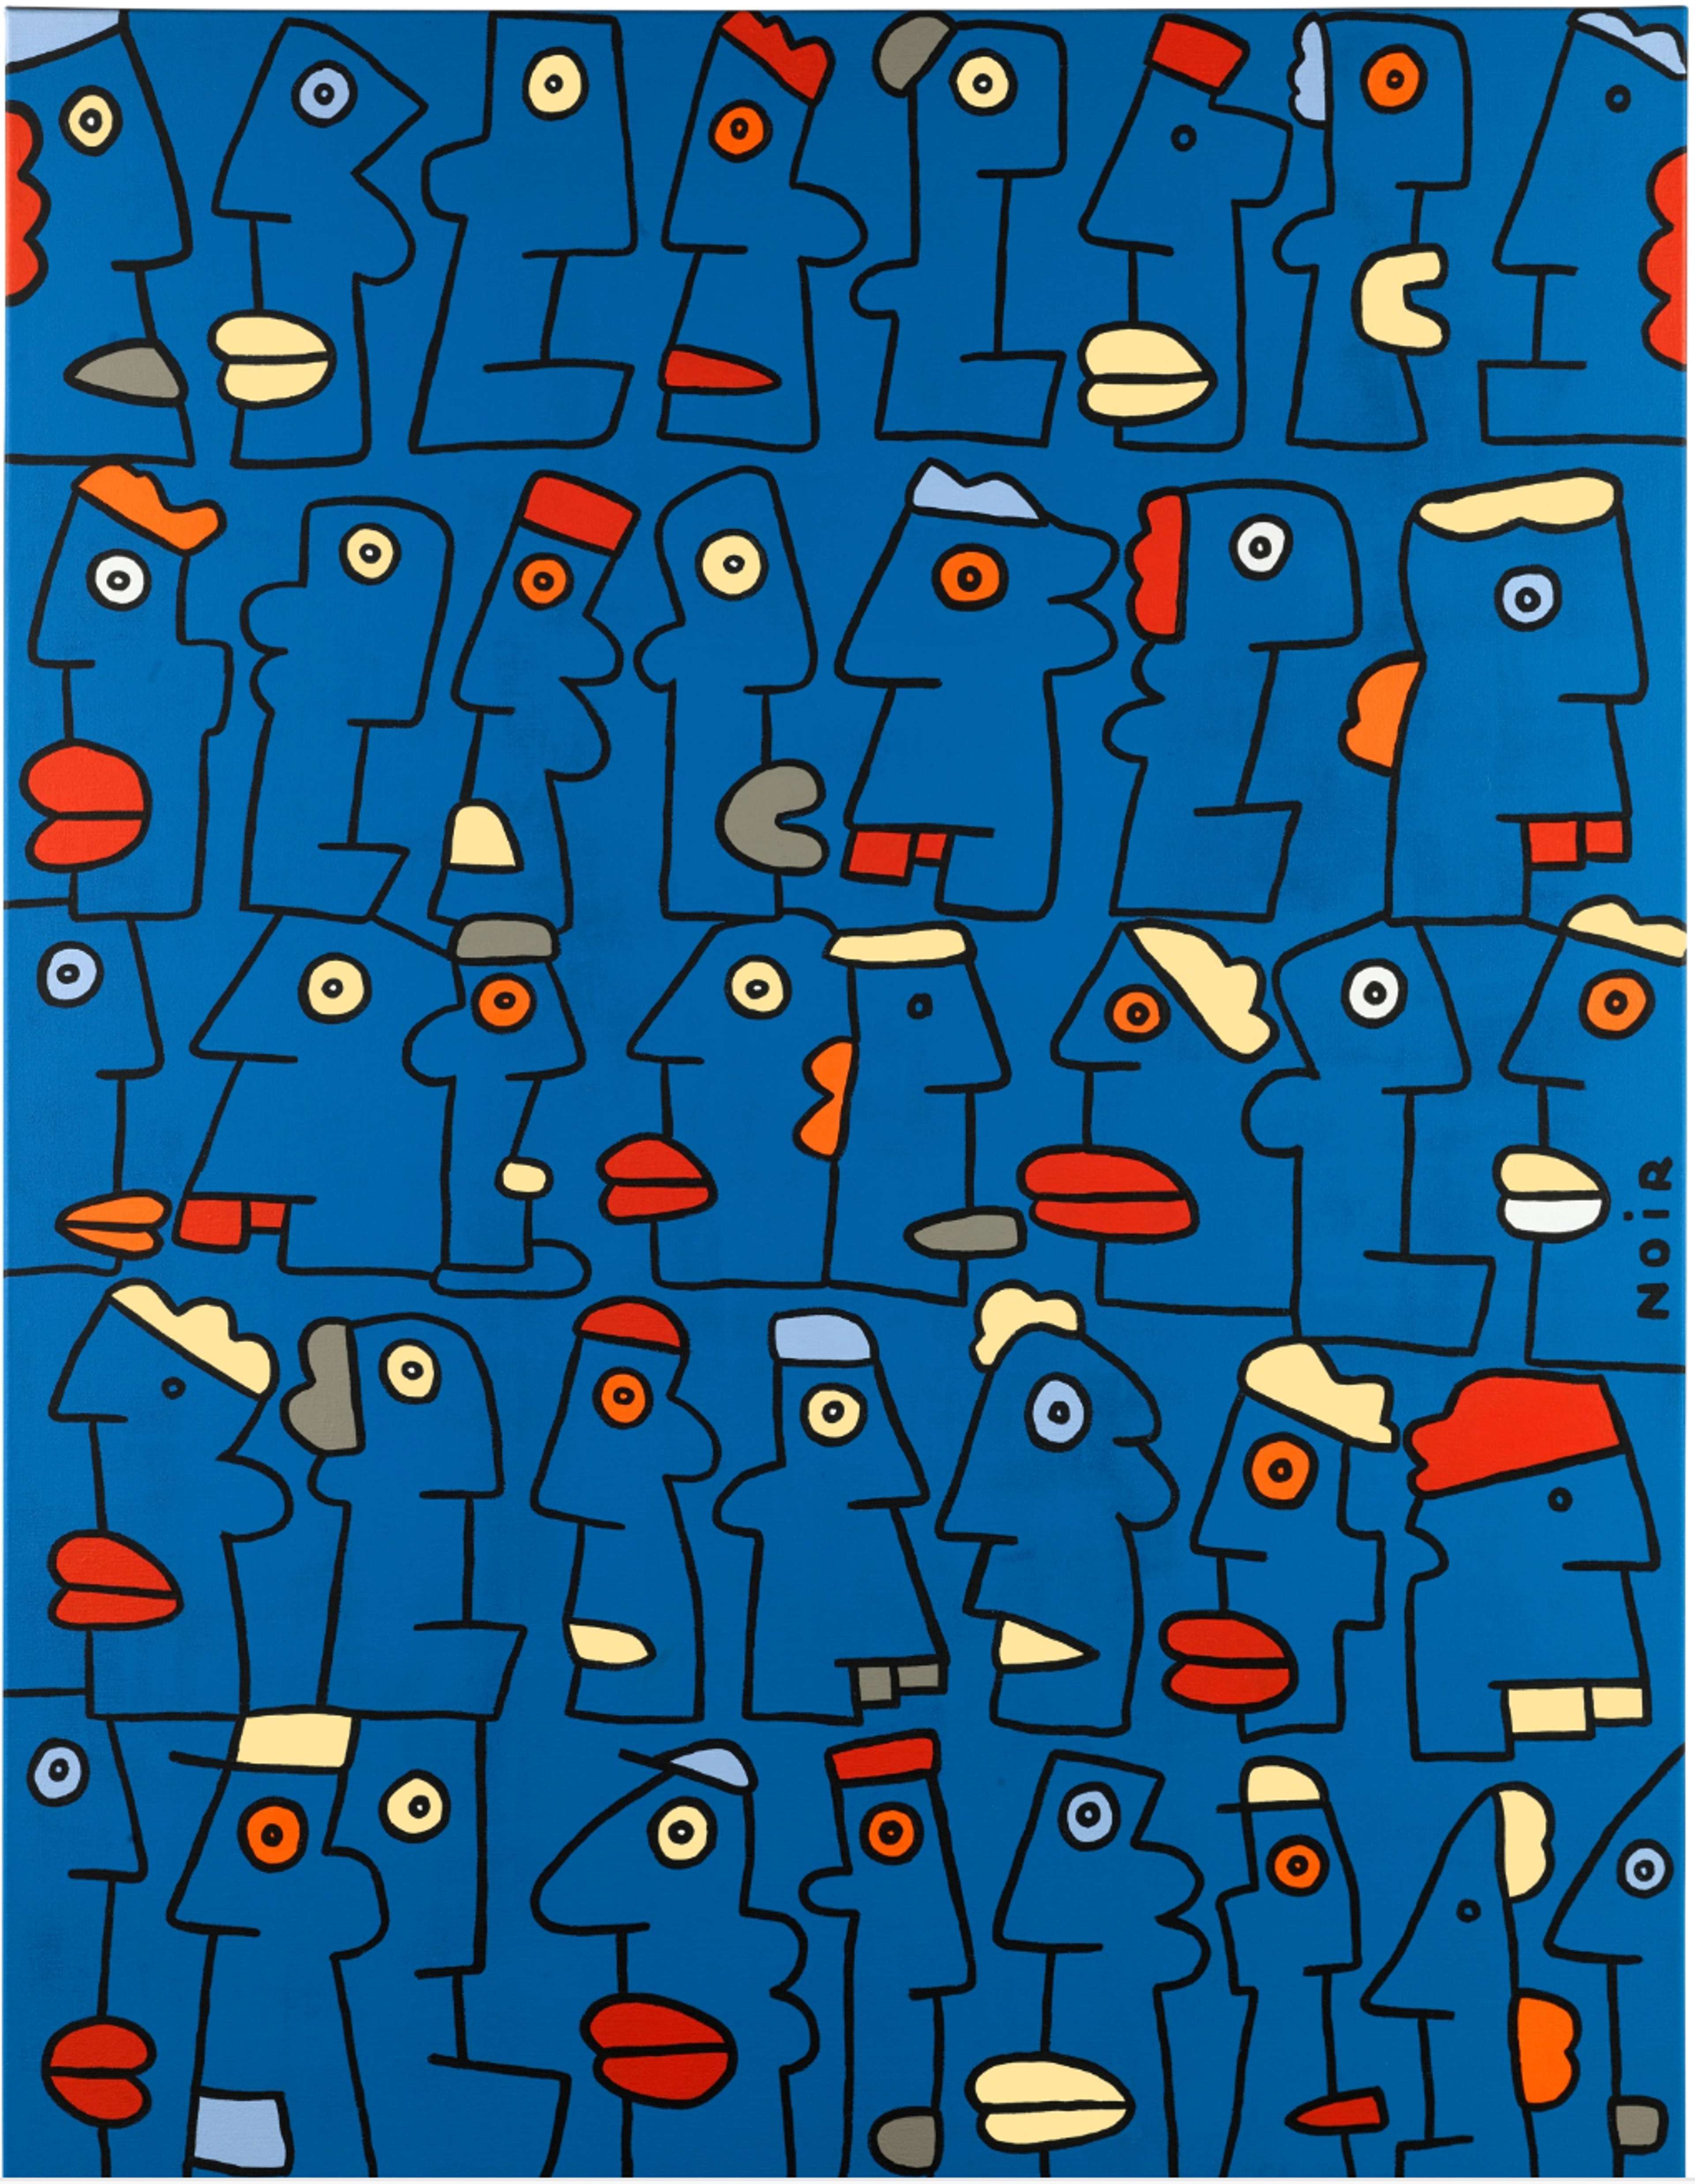 Abstract caricature faces in bold black lines arranged in a Tetris-like puzzle against a vibrant cerulean blue backdrop. The faces feature exaggerated lips in red, blue and white hair, and some with protruding teeth.